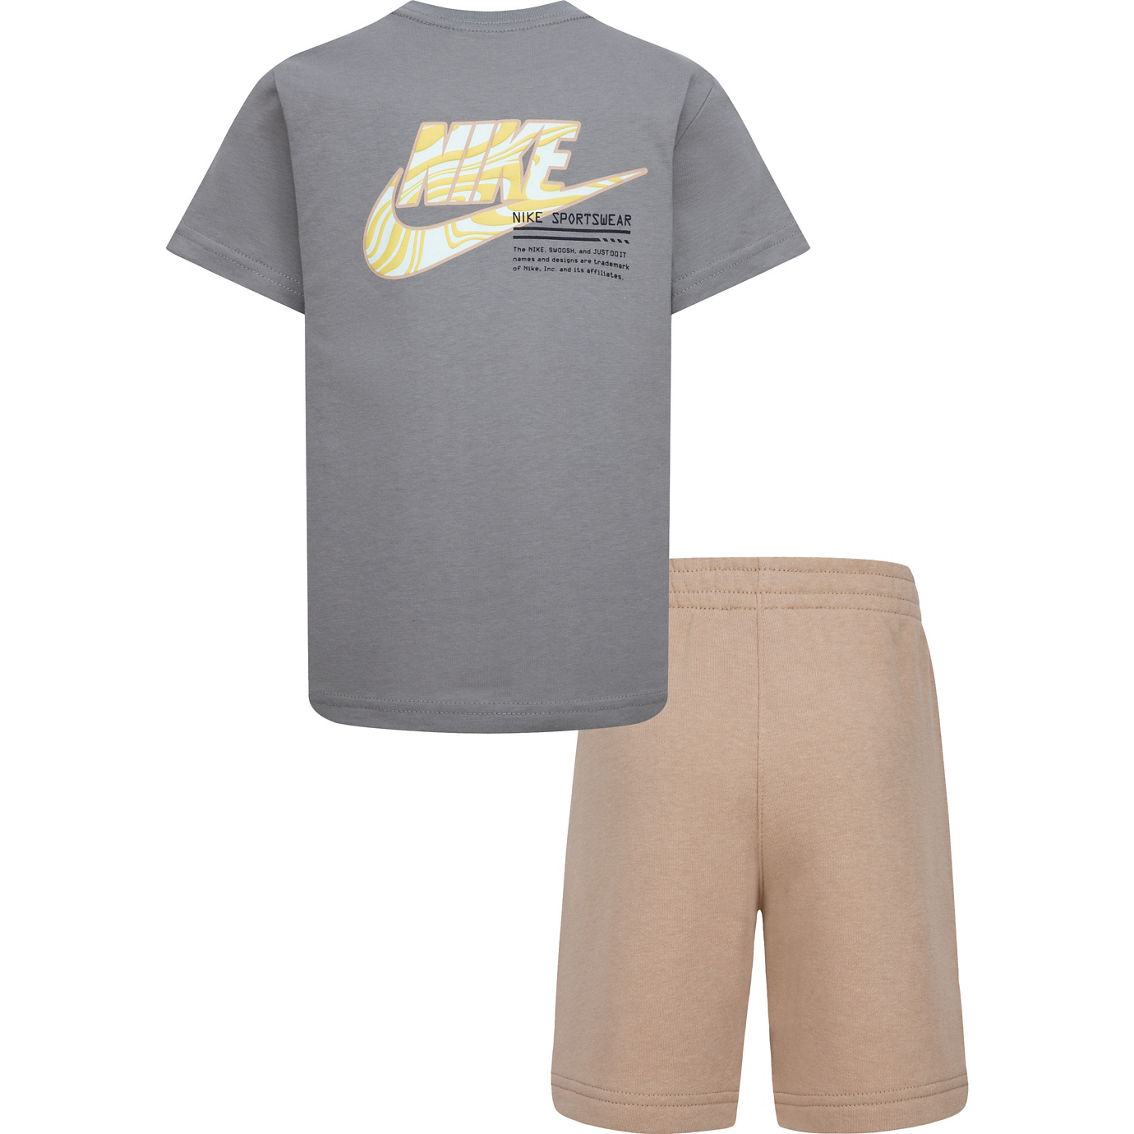 Nike Little Boys NSW Paint Tee and Shorts 2 pc. Set - Image 2 of 6